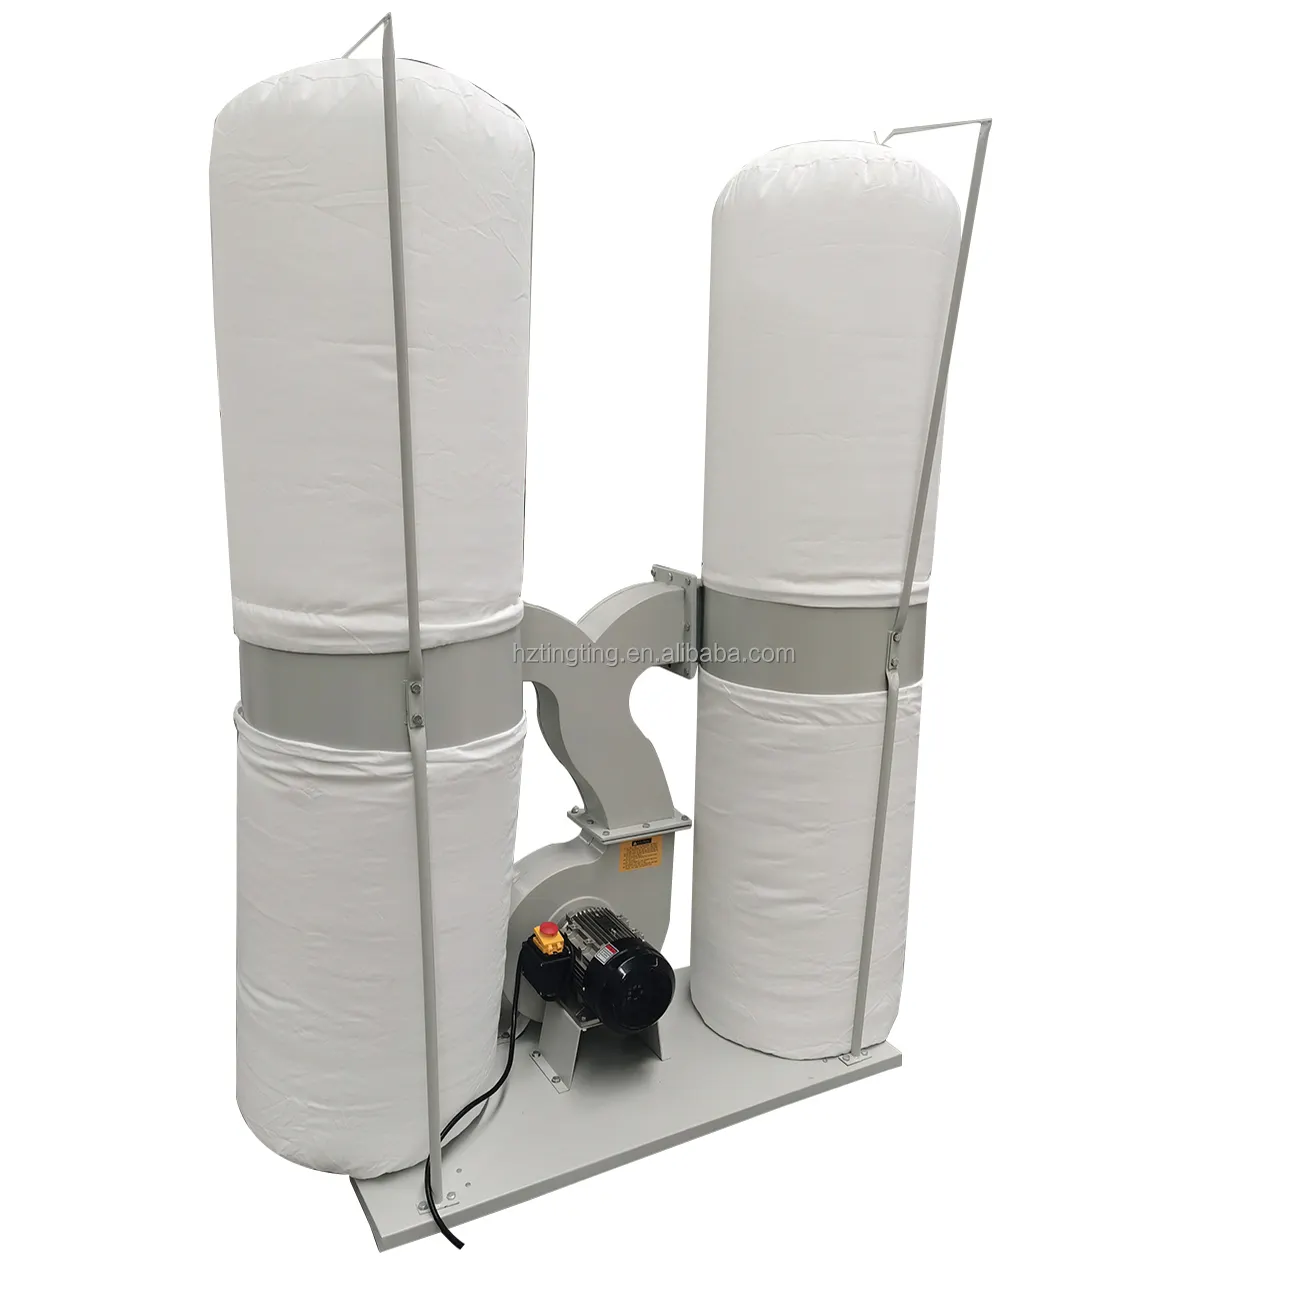 Double bag dust collector bag filter dust collecting machine wood saw cyclone dust collector machine